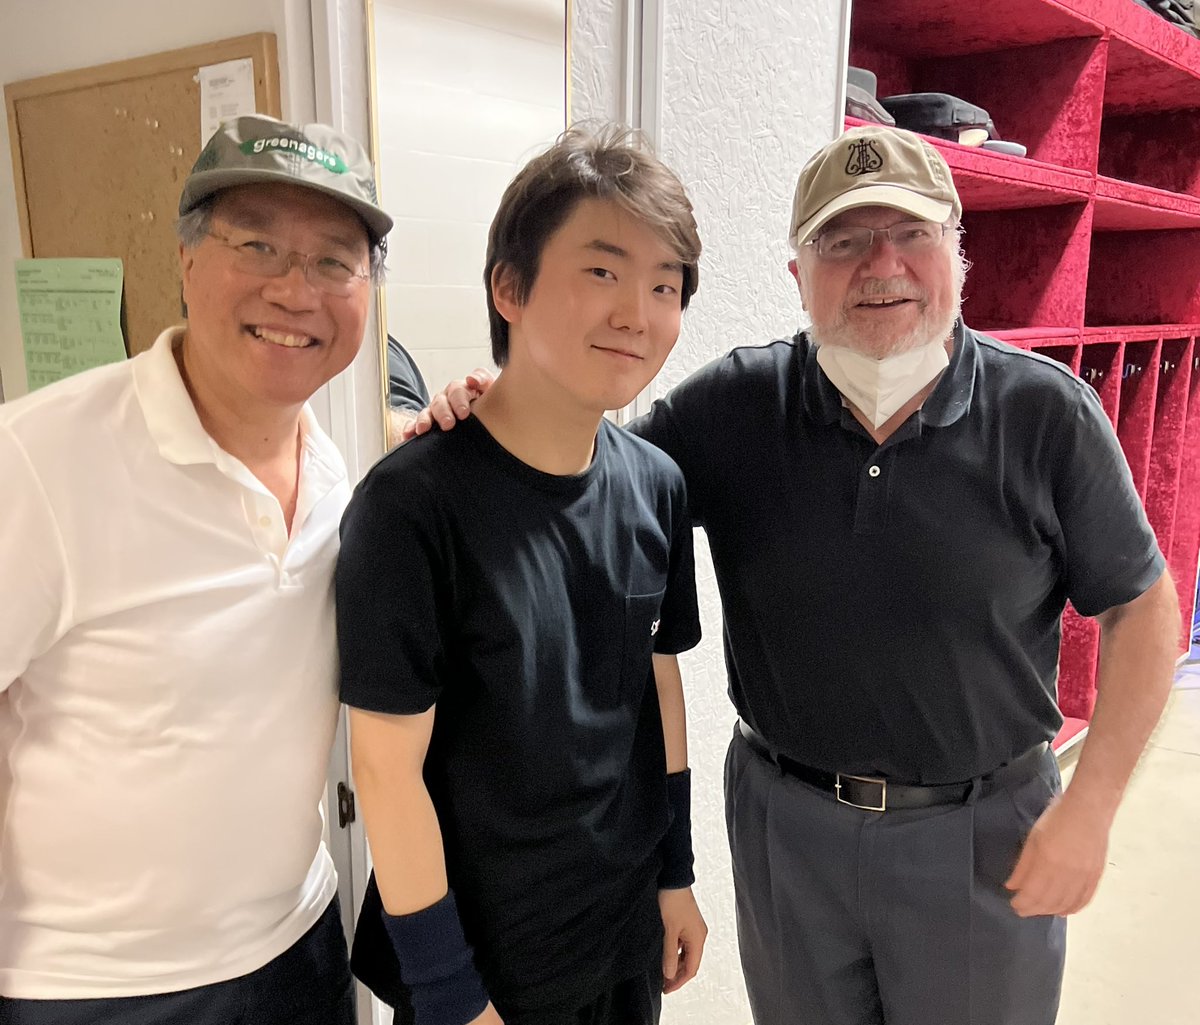 Thank you, @YoYo_Ma and @EmanuelAx for stopping by my rehearsal at @TanglewoodMA!